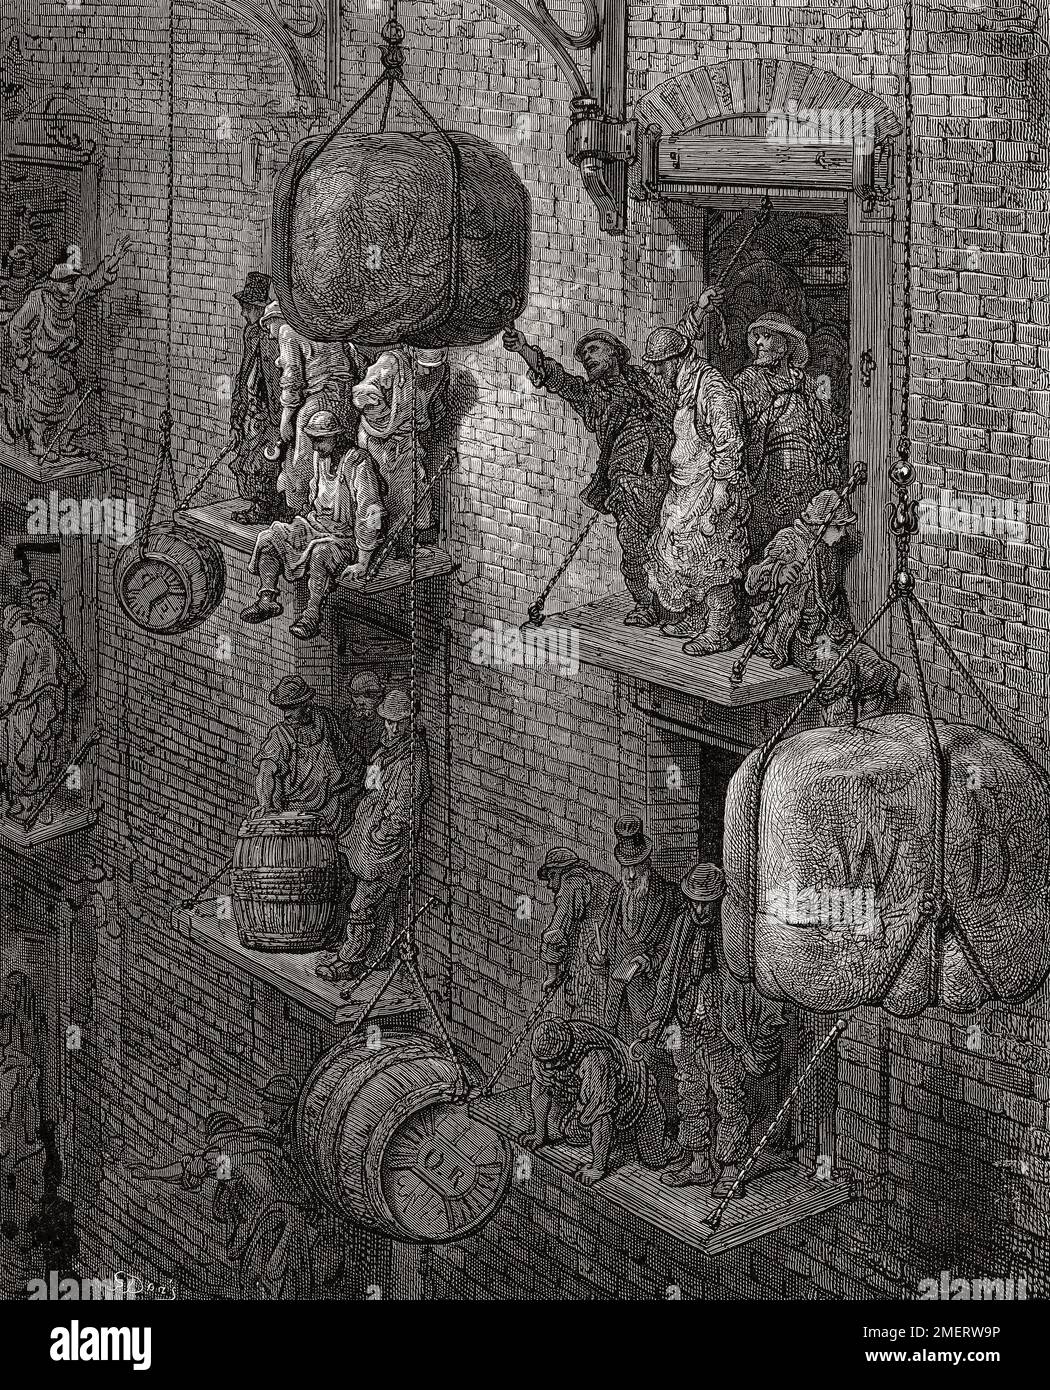 A warehouse in 19th century London.  After an illustration by Gustave Doré in the 1890 American edition of London: A Pilgrimage written by Blanchard Jerrold and illustrated by Gustave Doré. Stock Photo